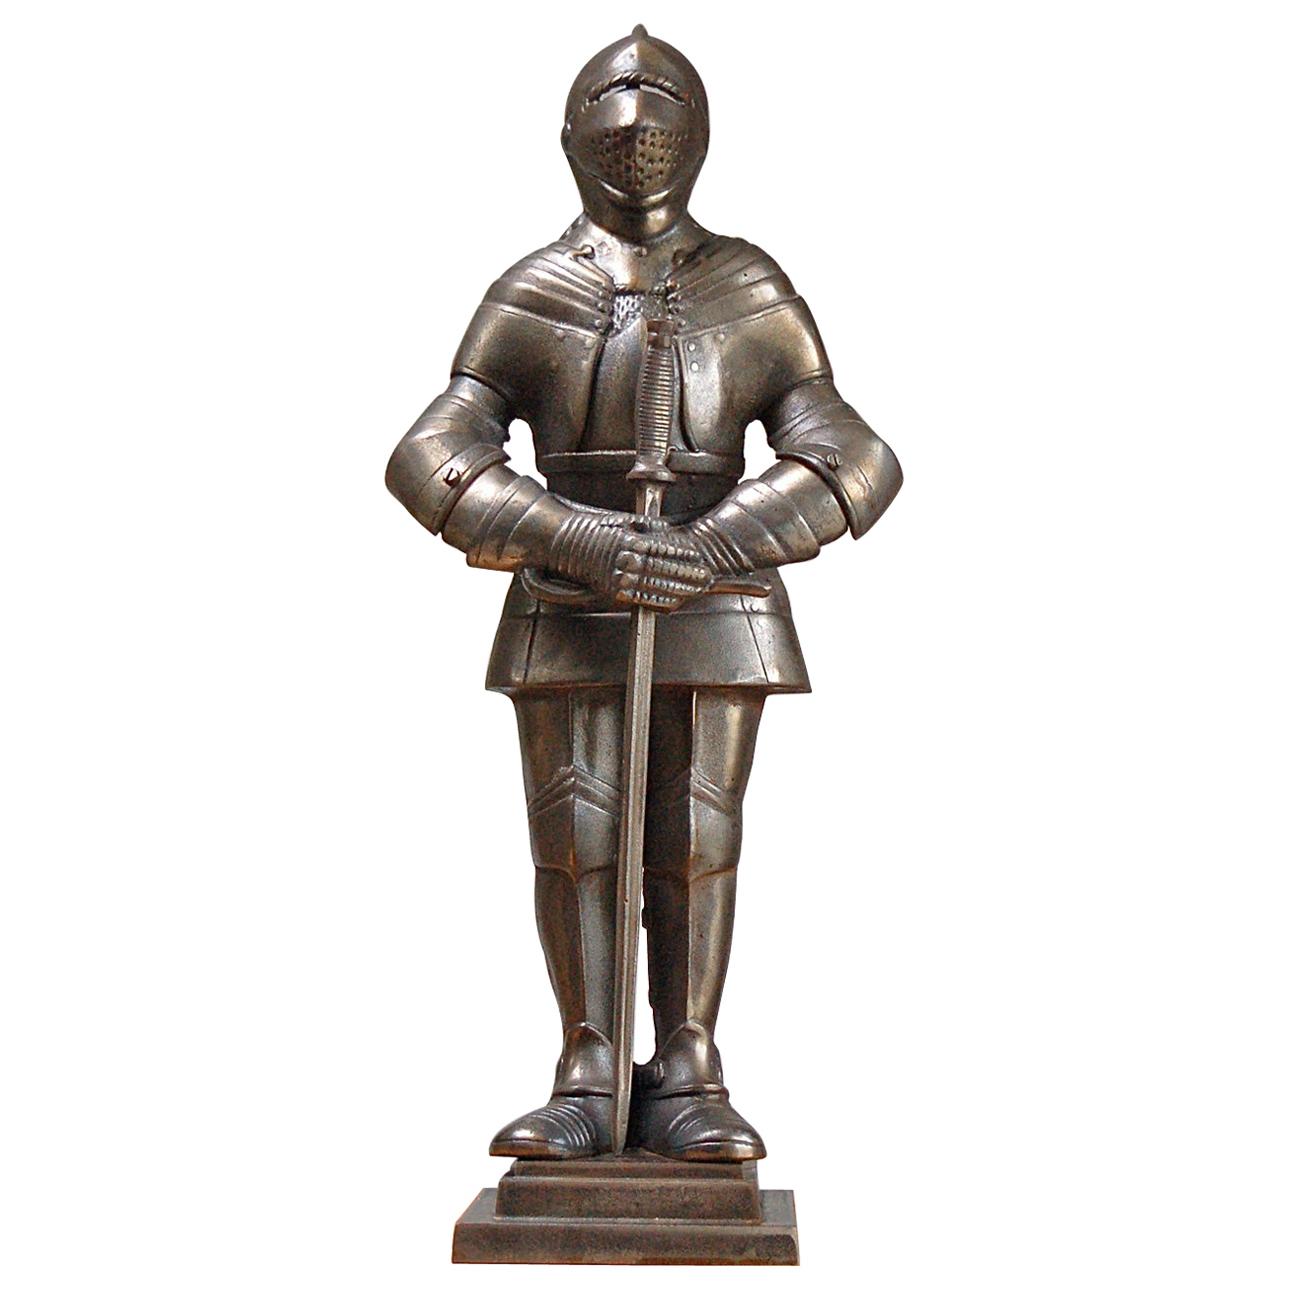 Fire Companion Stand in the Shape of a Medieval Knight, Late 20th Century